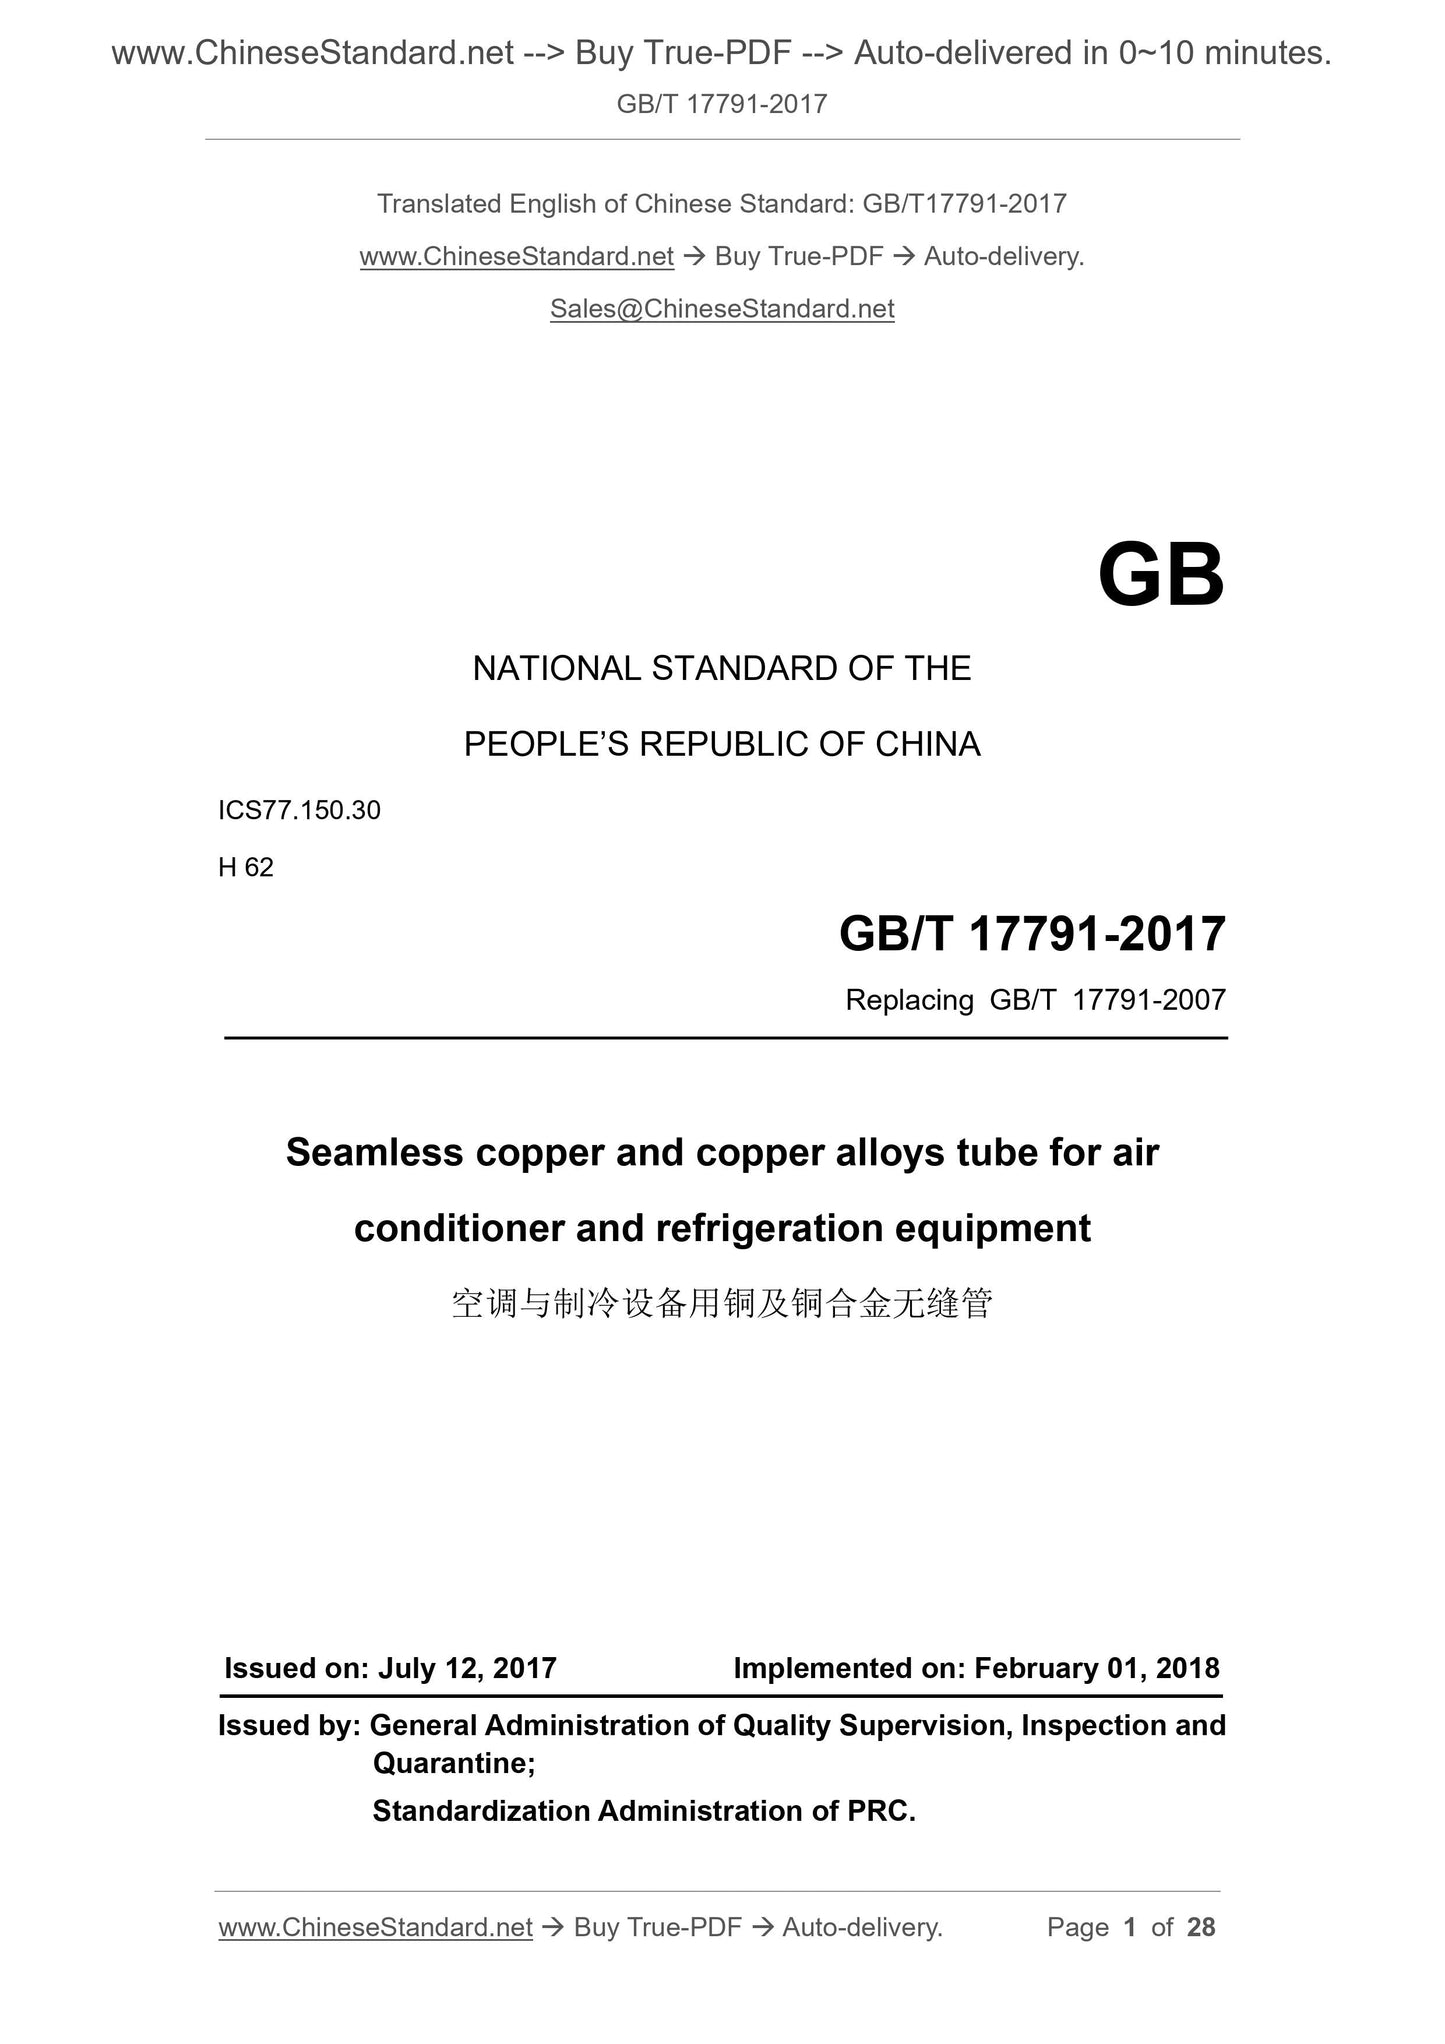 GB/T 17791-2017 Page 1